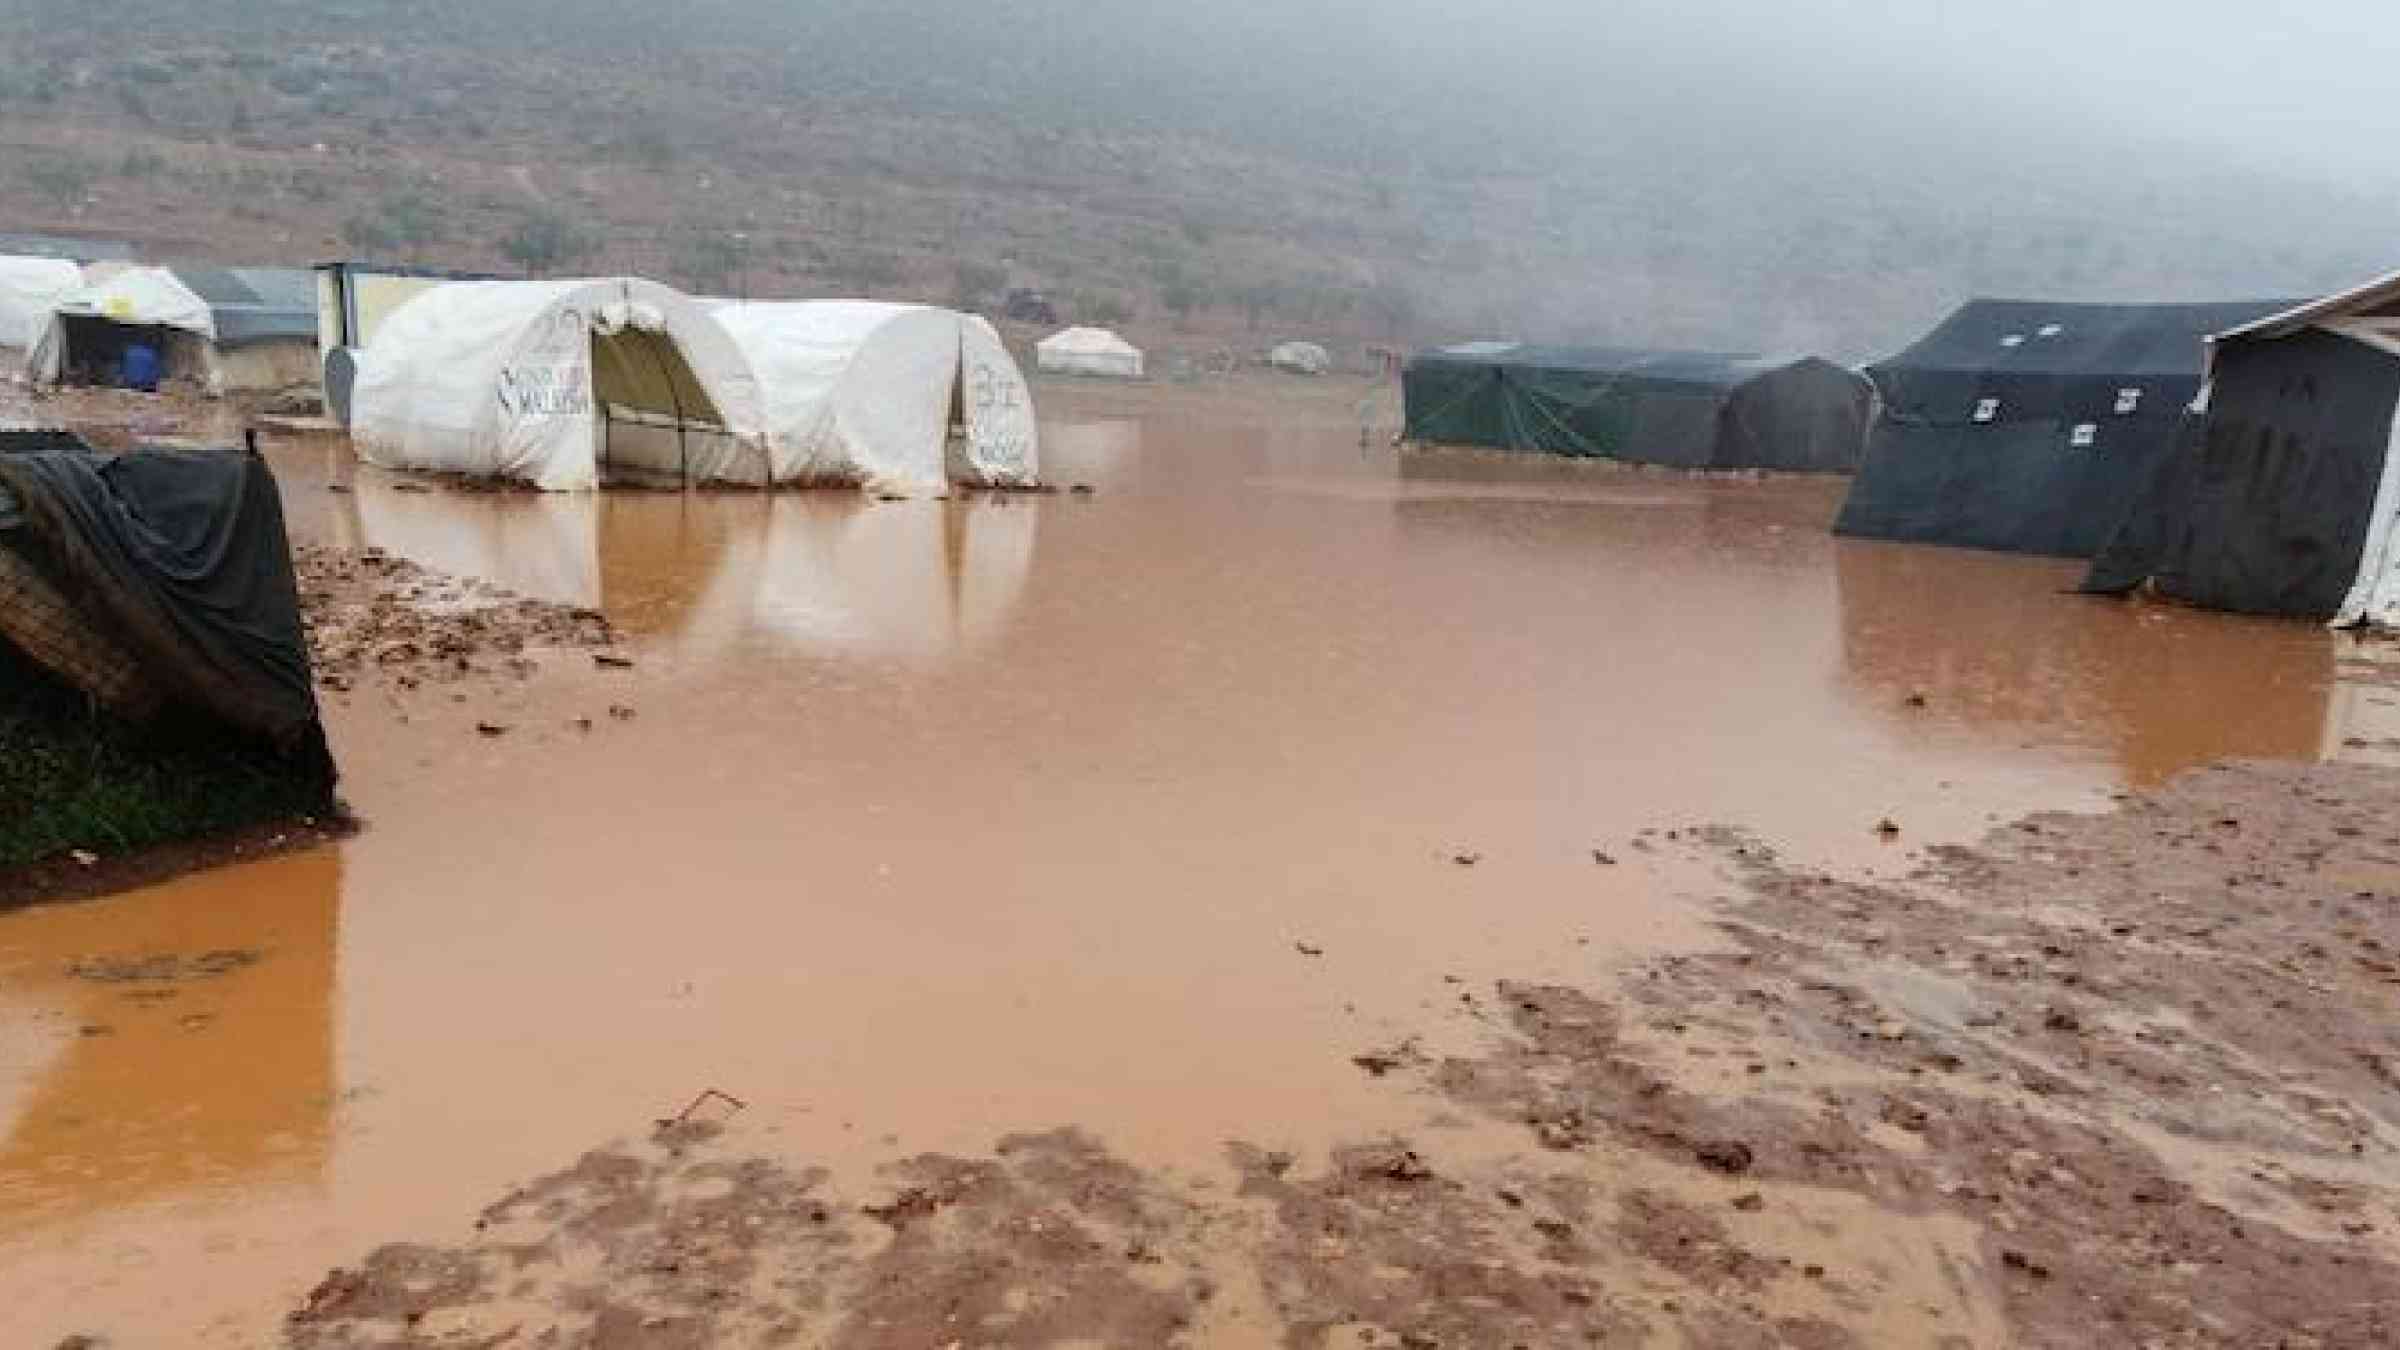 Save the Children- Floods inside a displacement camp in Idlib, North West Syria